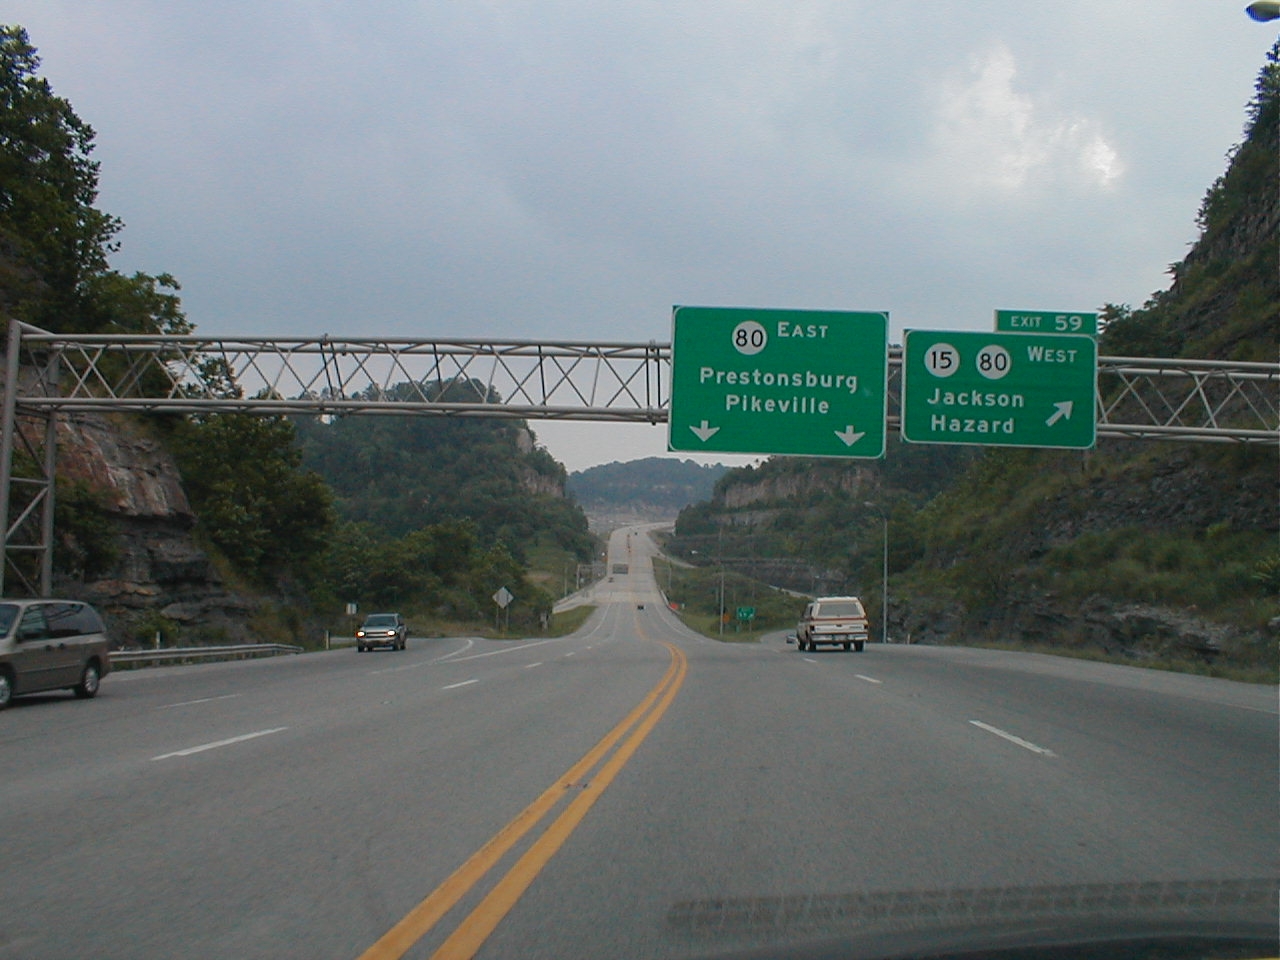 Exit 59. The eastern terminus of the parkway at KY 80 and KY 15 is nestled into this rock cut.